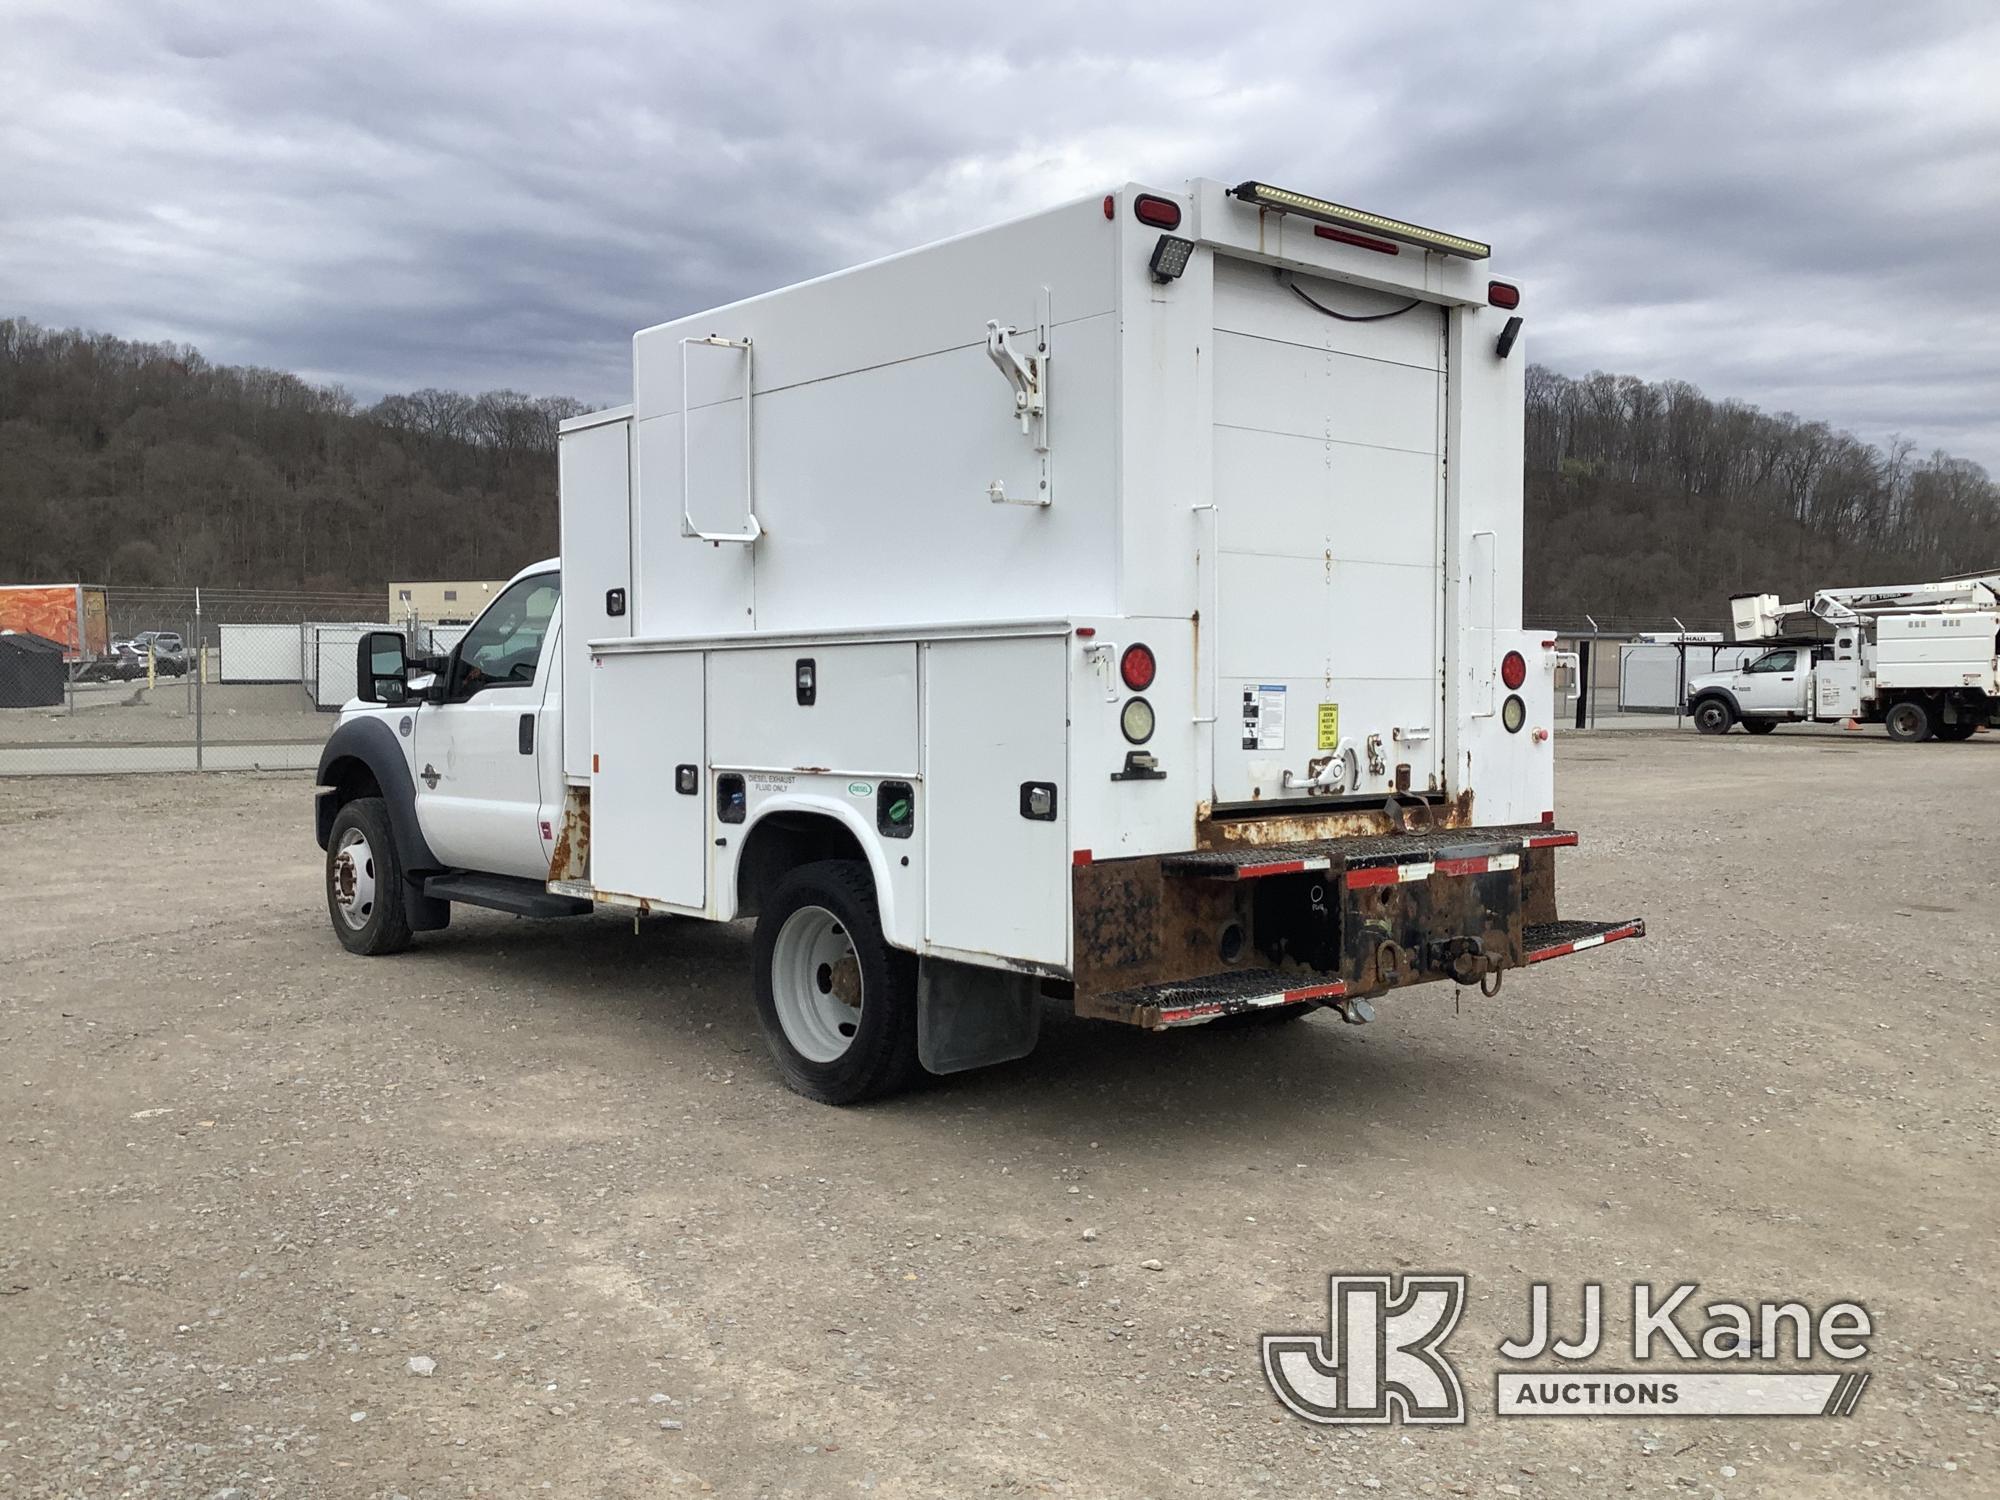 (Smock, PA) 2015 Ford F550 Air Compressor/Enclosed Utility Truck Runs Rough & Moves, Engine Light On